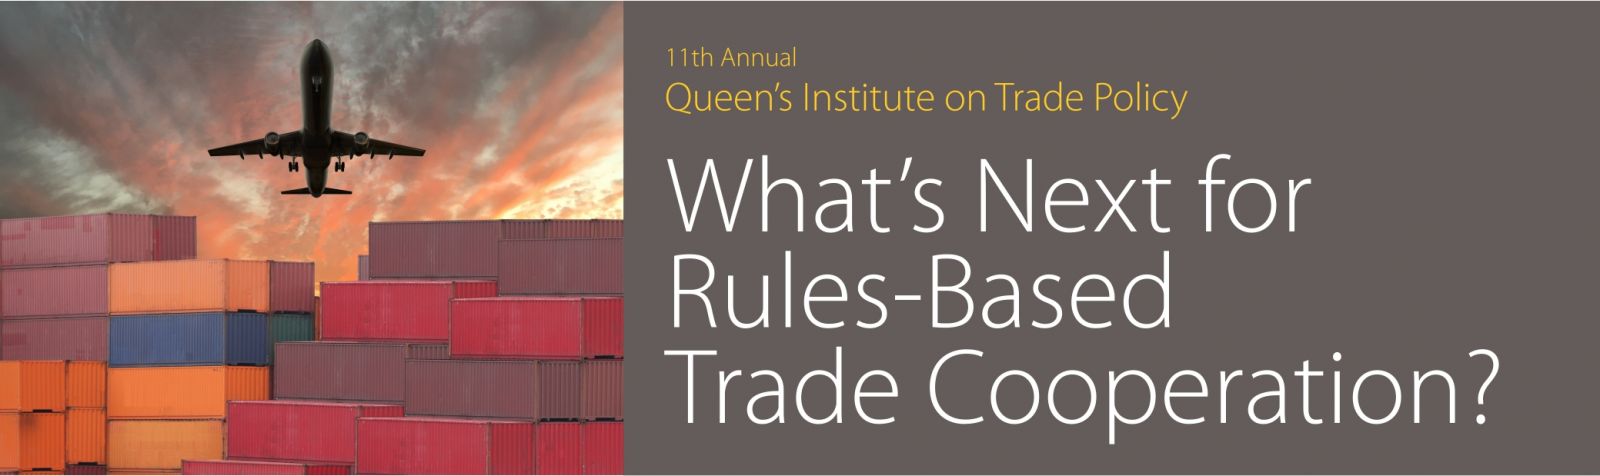 2019 Queen's Institute on Trade Policy: What’s Next for Rules-Based Trade Cooperation? - Nov 17 - 19, 2019 [image]